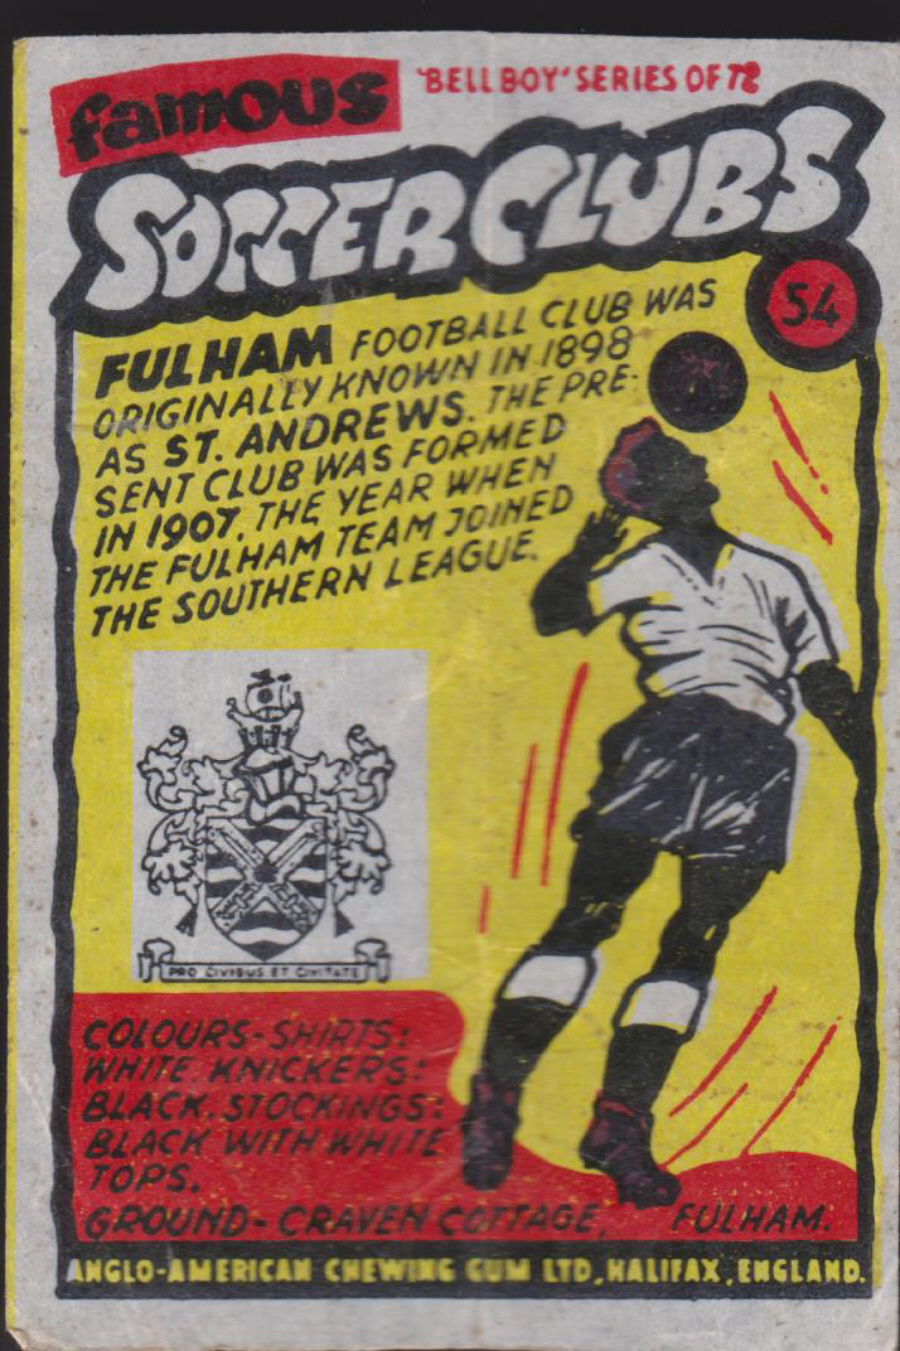 Anglo-American-Chewing-Gum-Wax-Wrapper-Famous-Soccer-Clubs-No-54 - Fulham